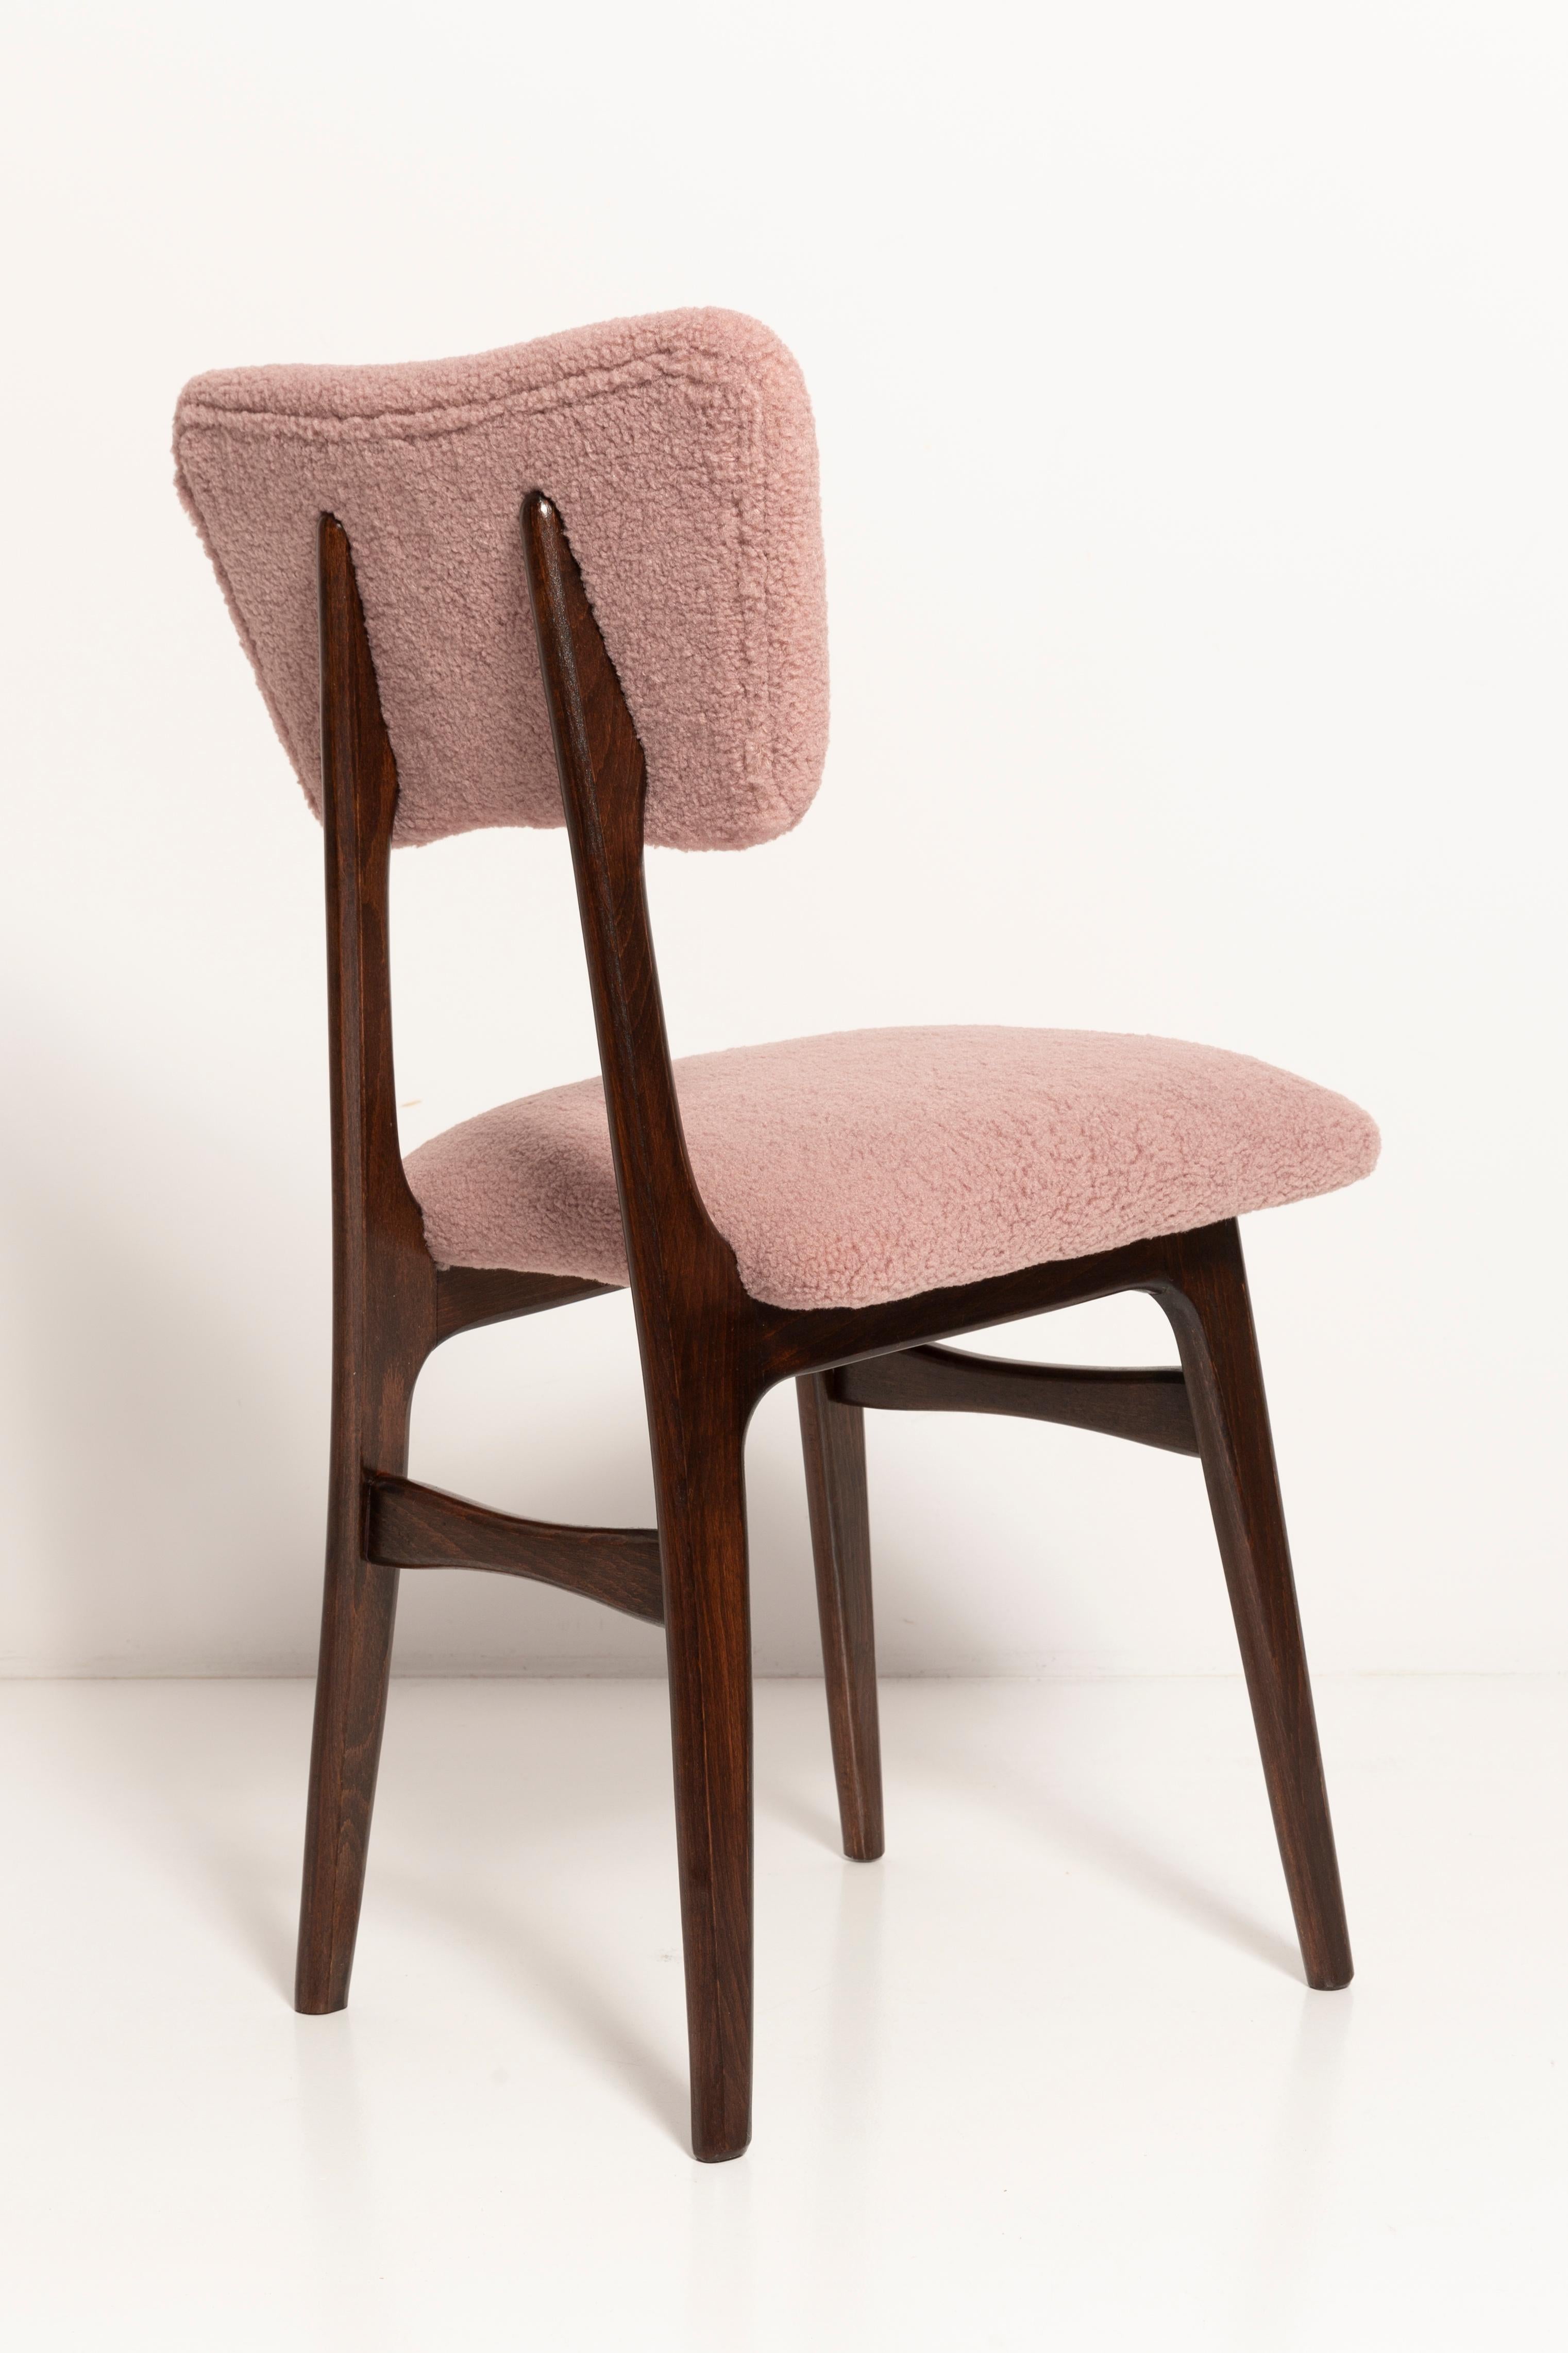 Set of Four Mid Century Butterfly Dining Chairs, Pink Boucle, Europe, 1960s For Sale 2